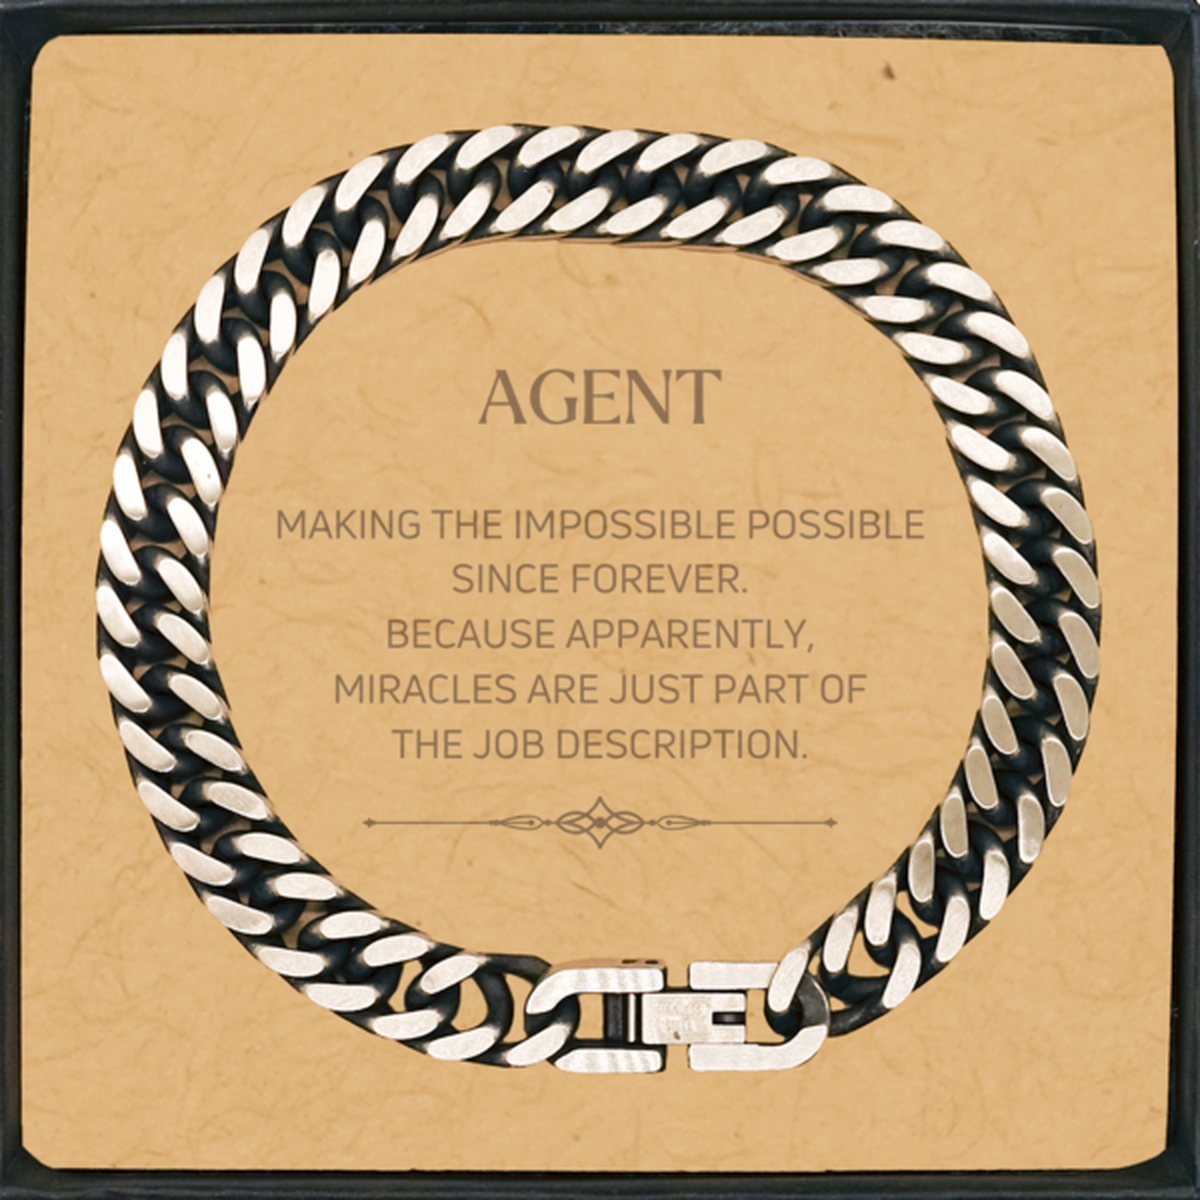 Funny Agent Gifts, Miracles are just part of the job description, Inspirational Birthday Cuban Link Chain Bracelet For Agent, Men, Women, Coworkers, Friends, Boss